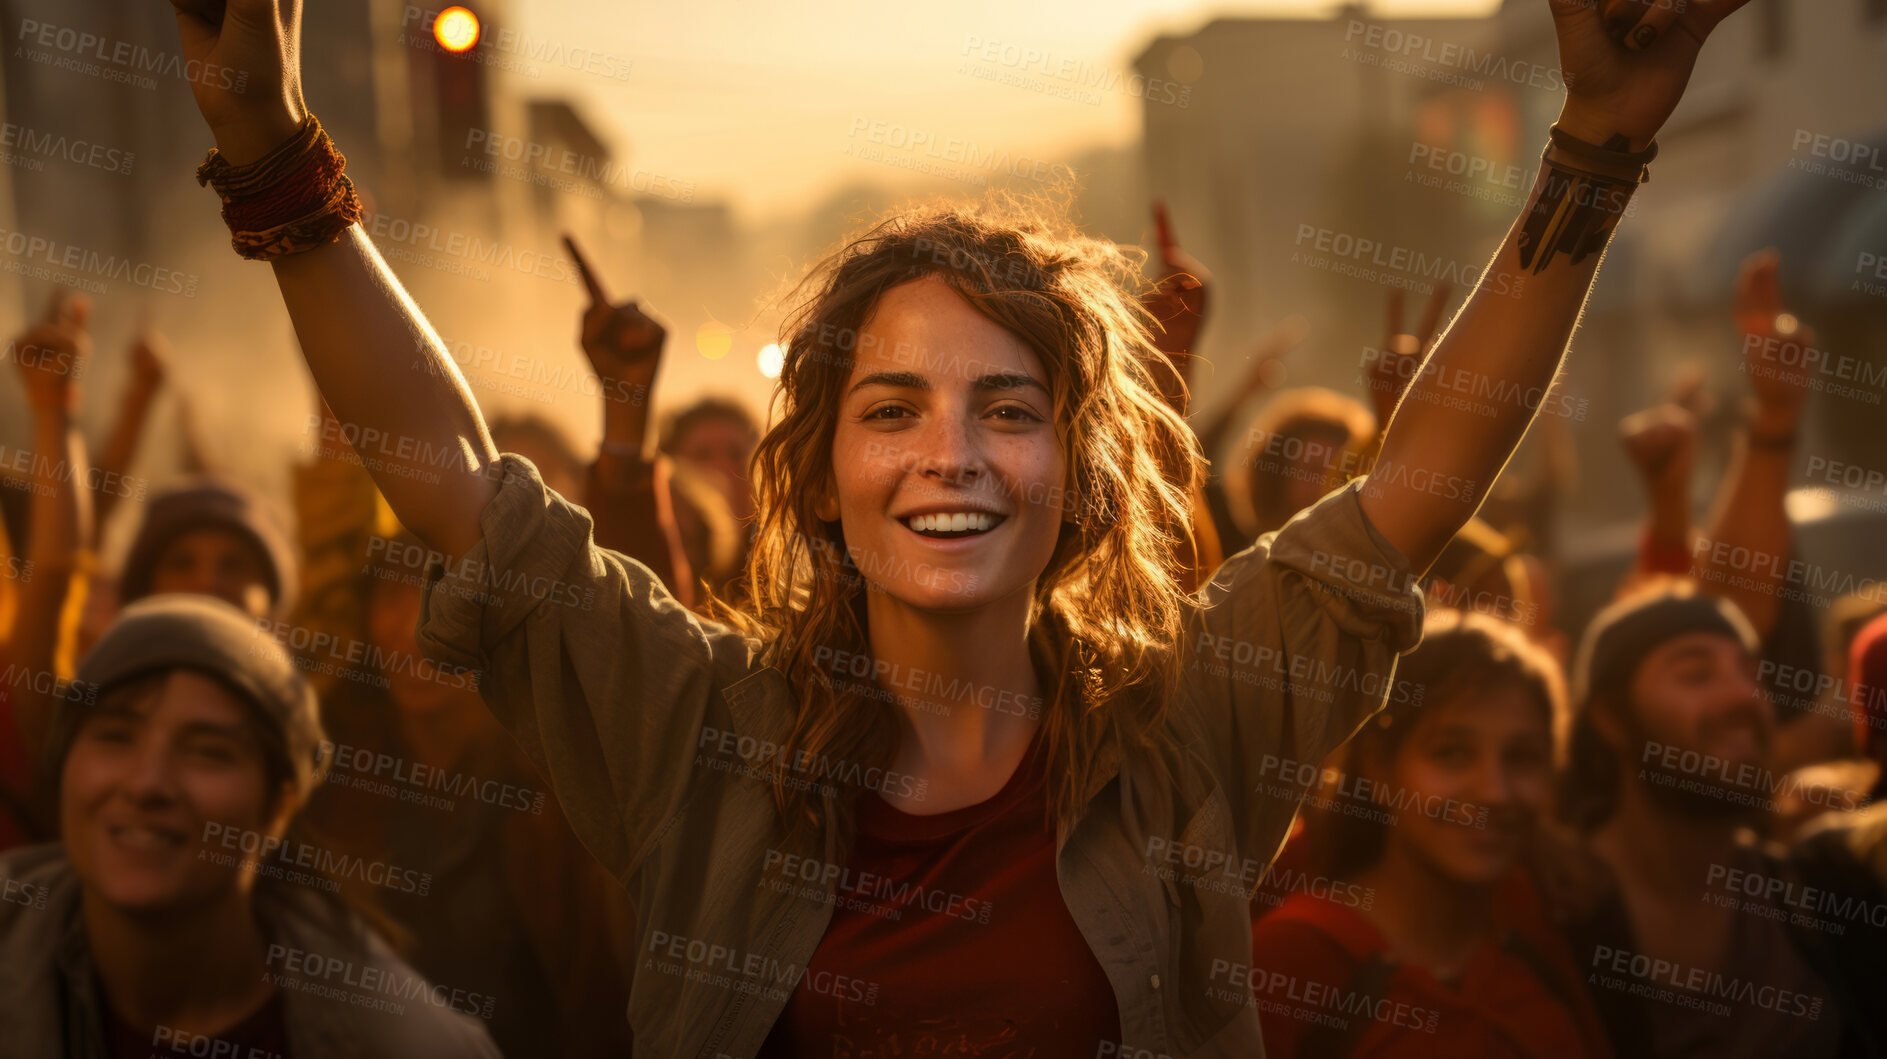 Buy stock photo Happy woman protester in mach. Human rights. Activism concept.